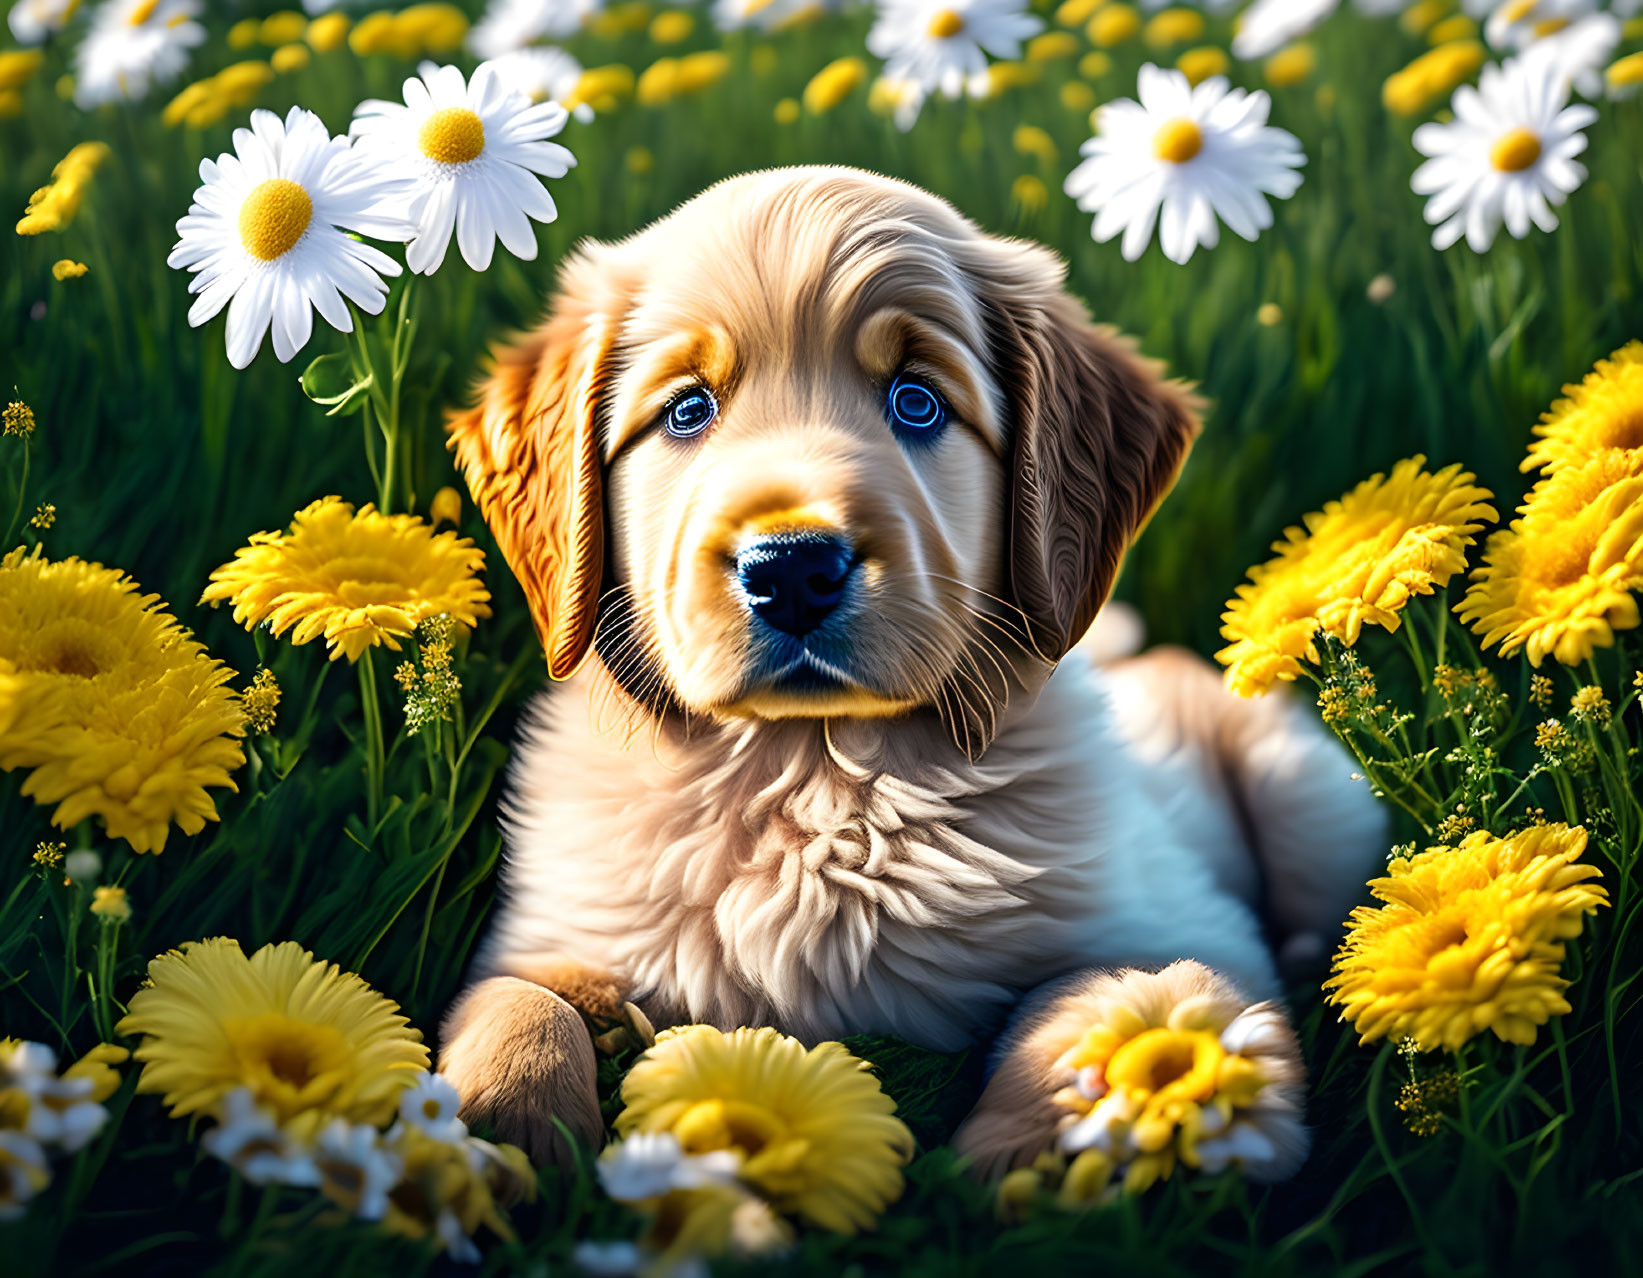 Golden Retriever Puppy Surrounded by Yellow and White Flowers